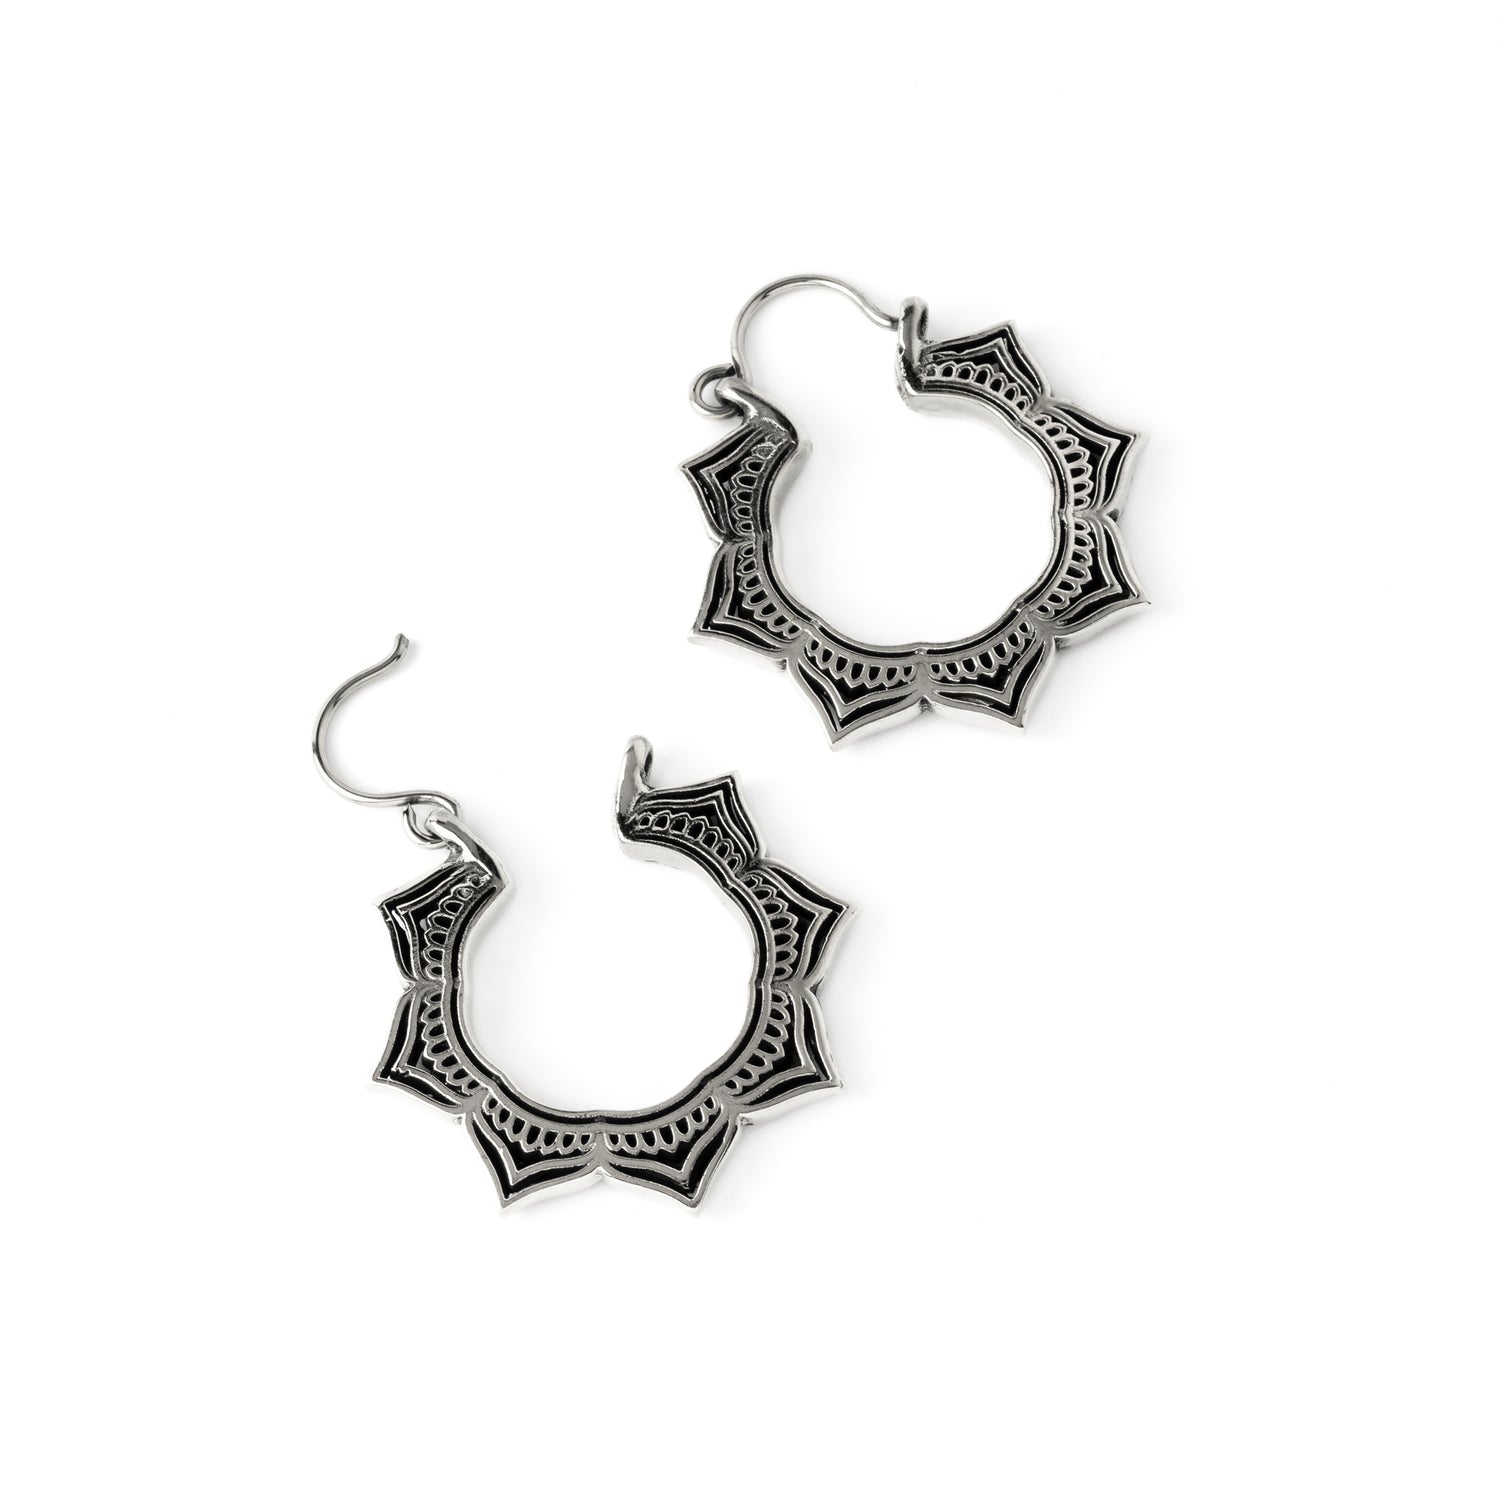 Padma Blossom Earrings left side open clasp view